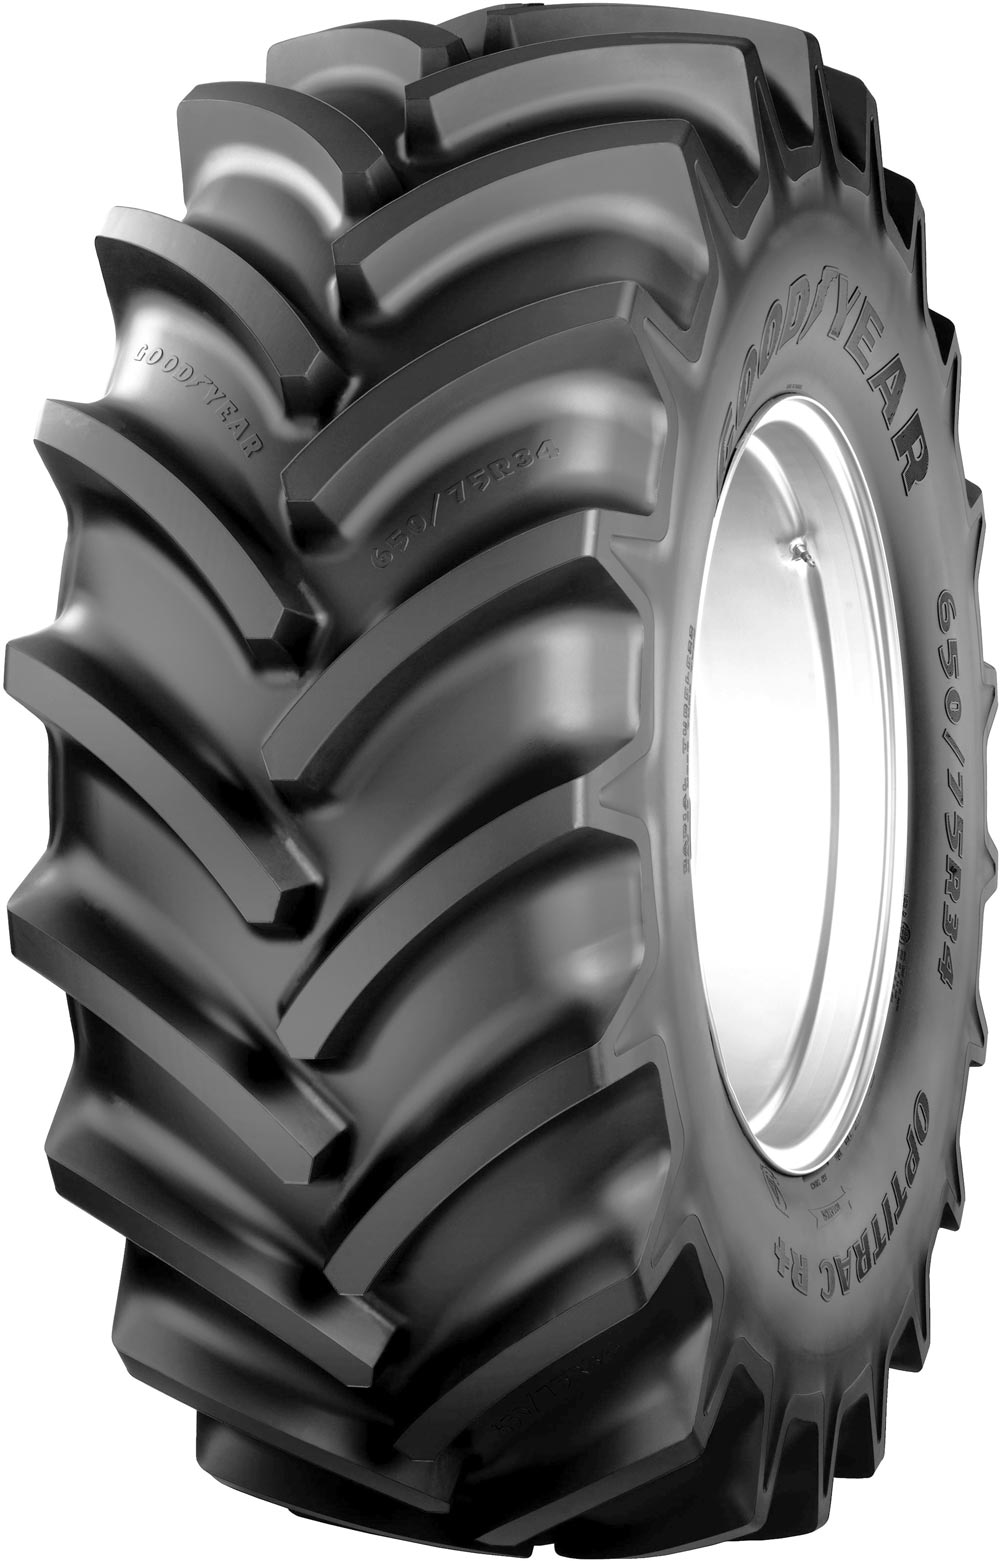 product_type-industrial_tires GOODYEAR Optitrac R+ TL 650/65 R34 164D